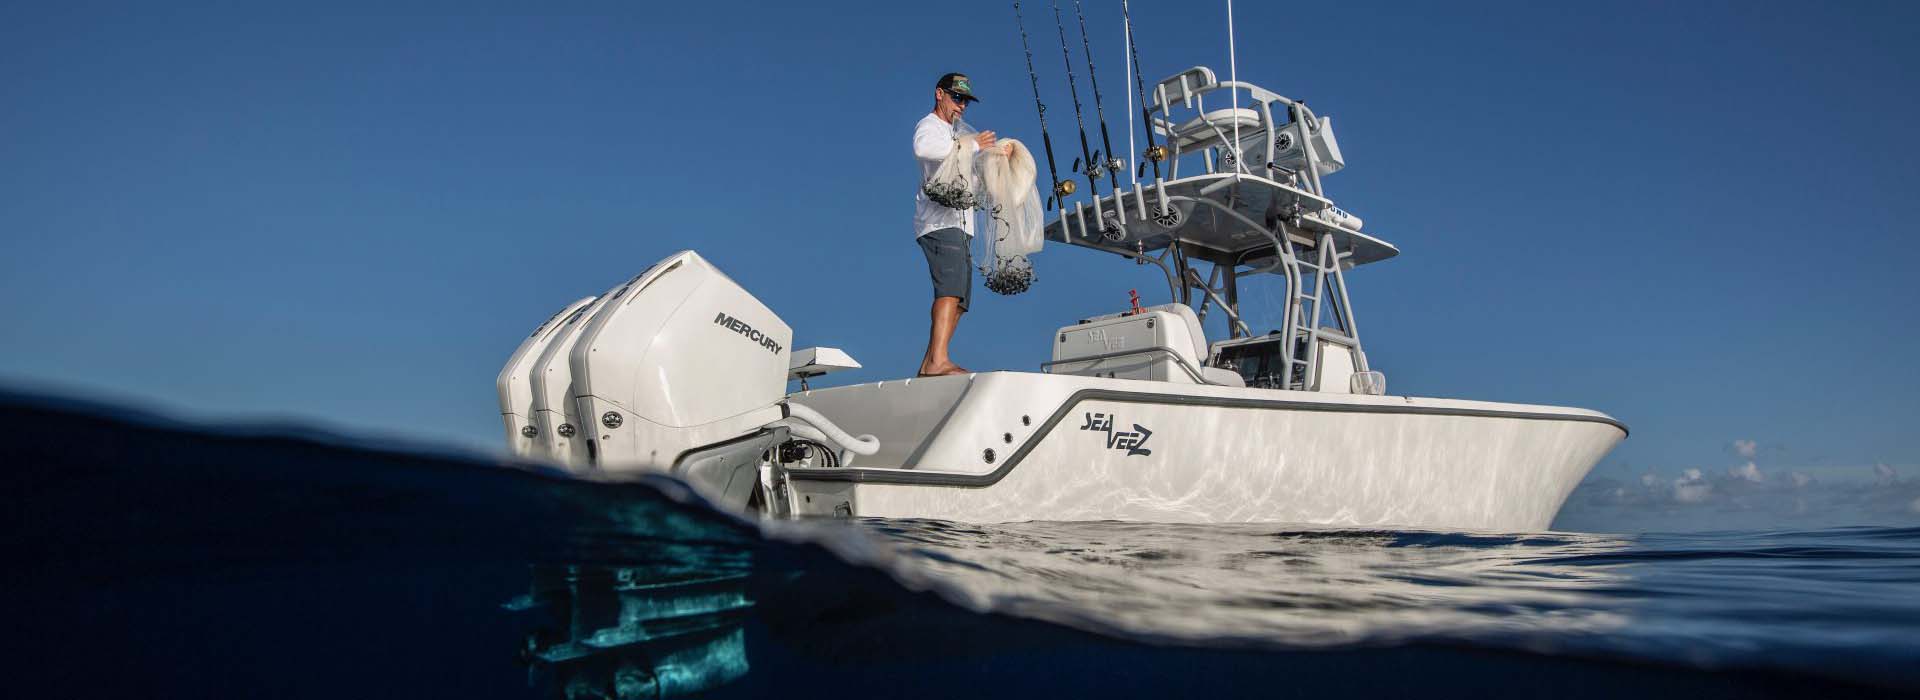 Offshore Fly Fishing - Sting Rea Charters